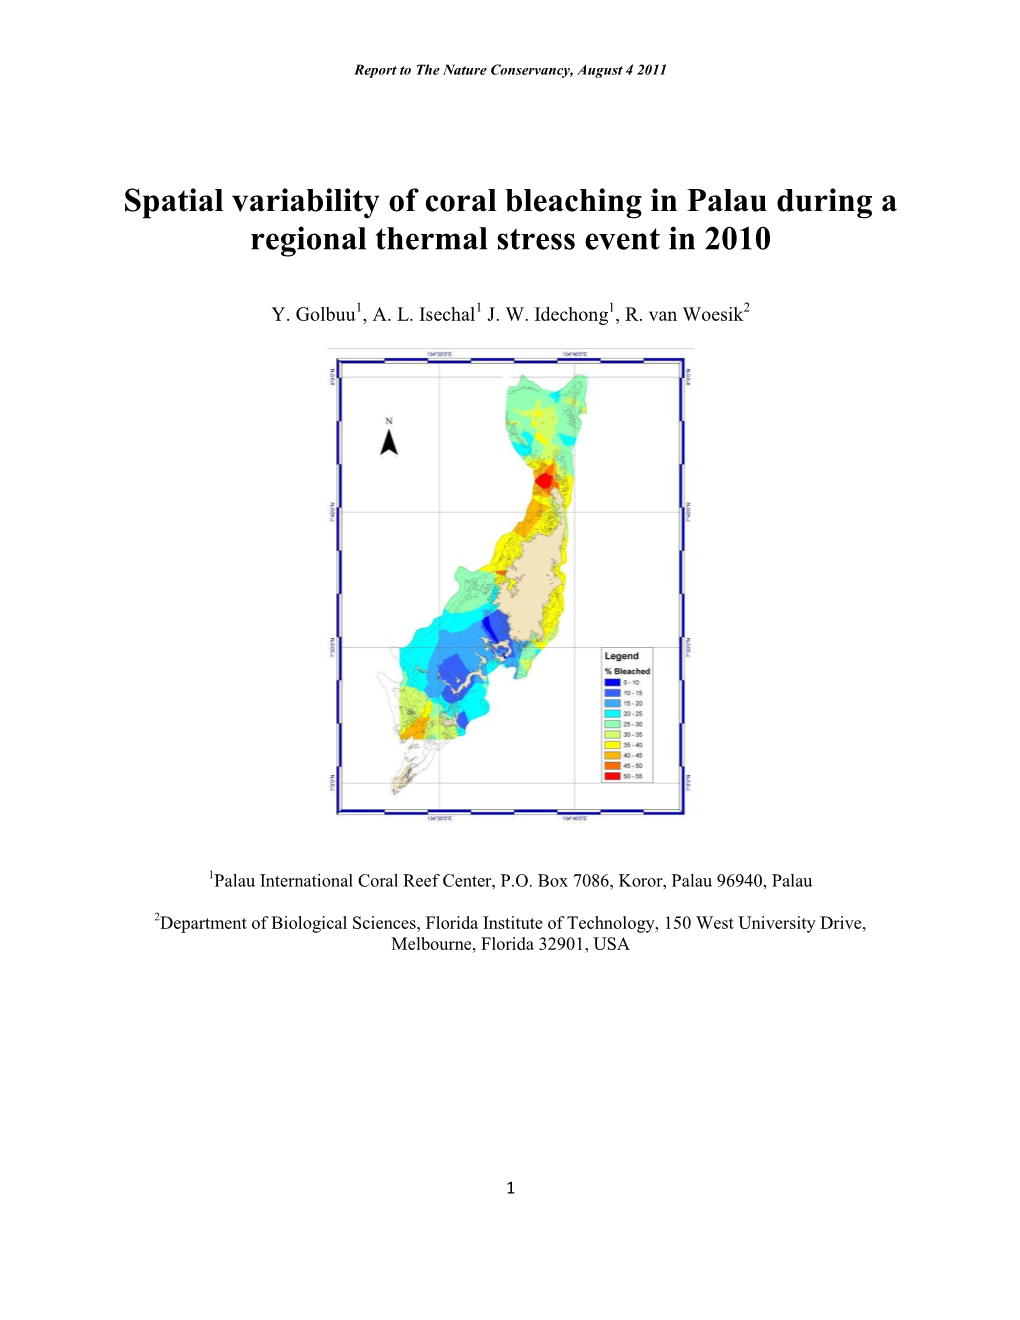 Spatial Variability of Coral Bleaching in Palau During a Regional Thermal Stress Event in 2010